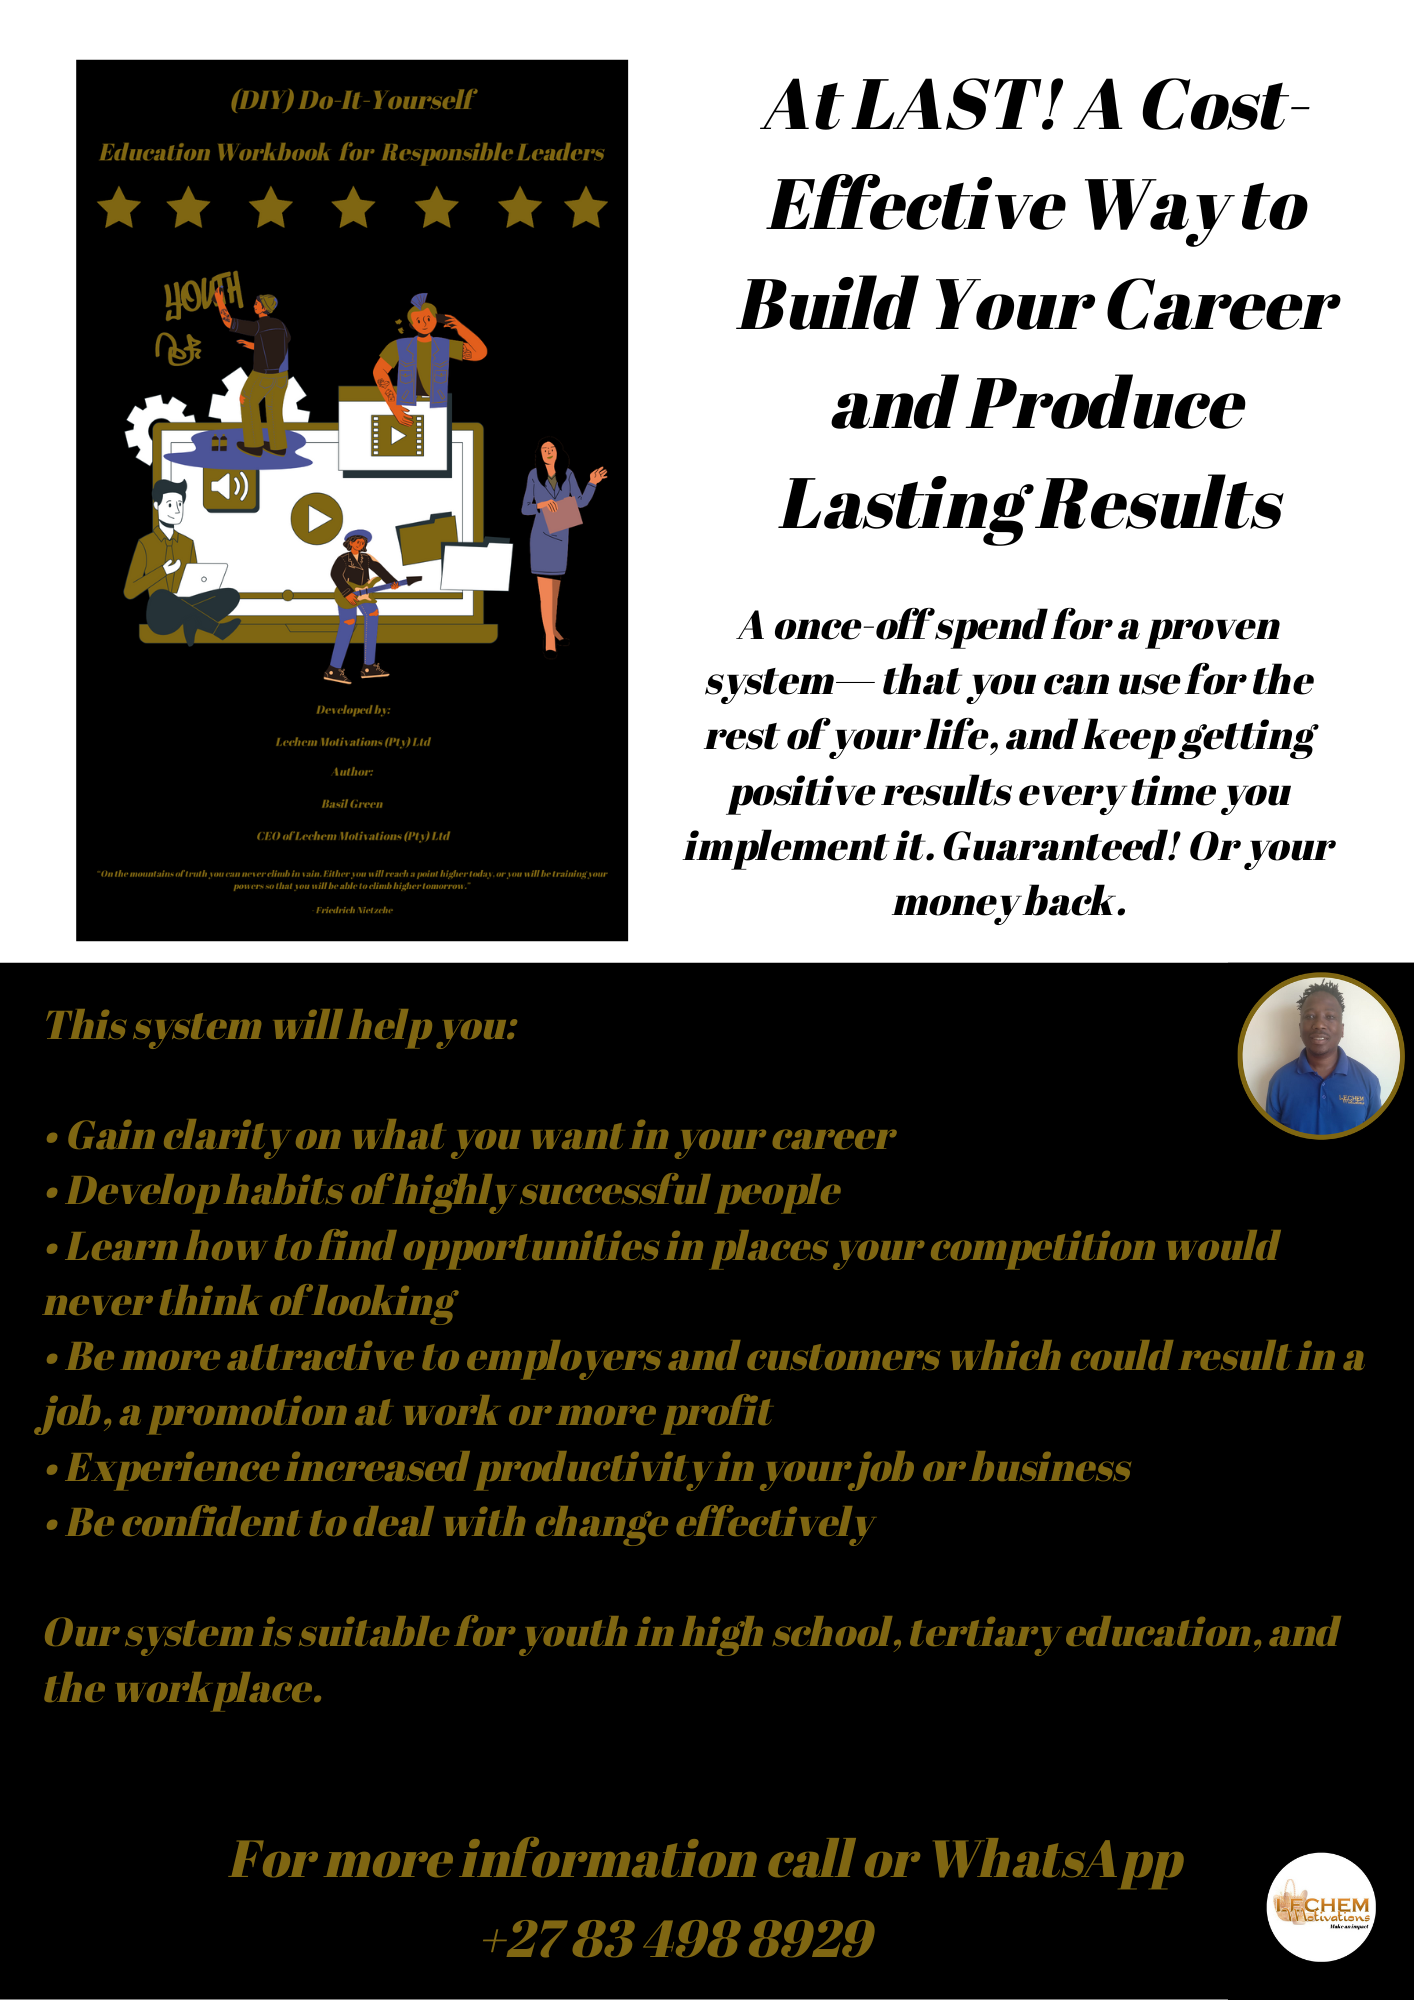 Cost Effective Way to Build Your Career and Produce Lasting Results